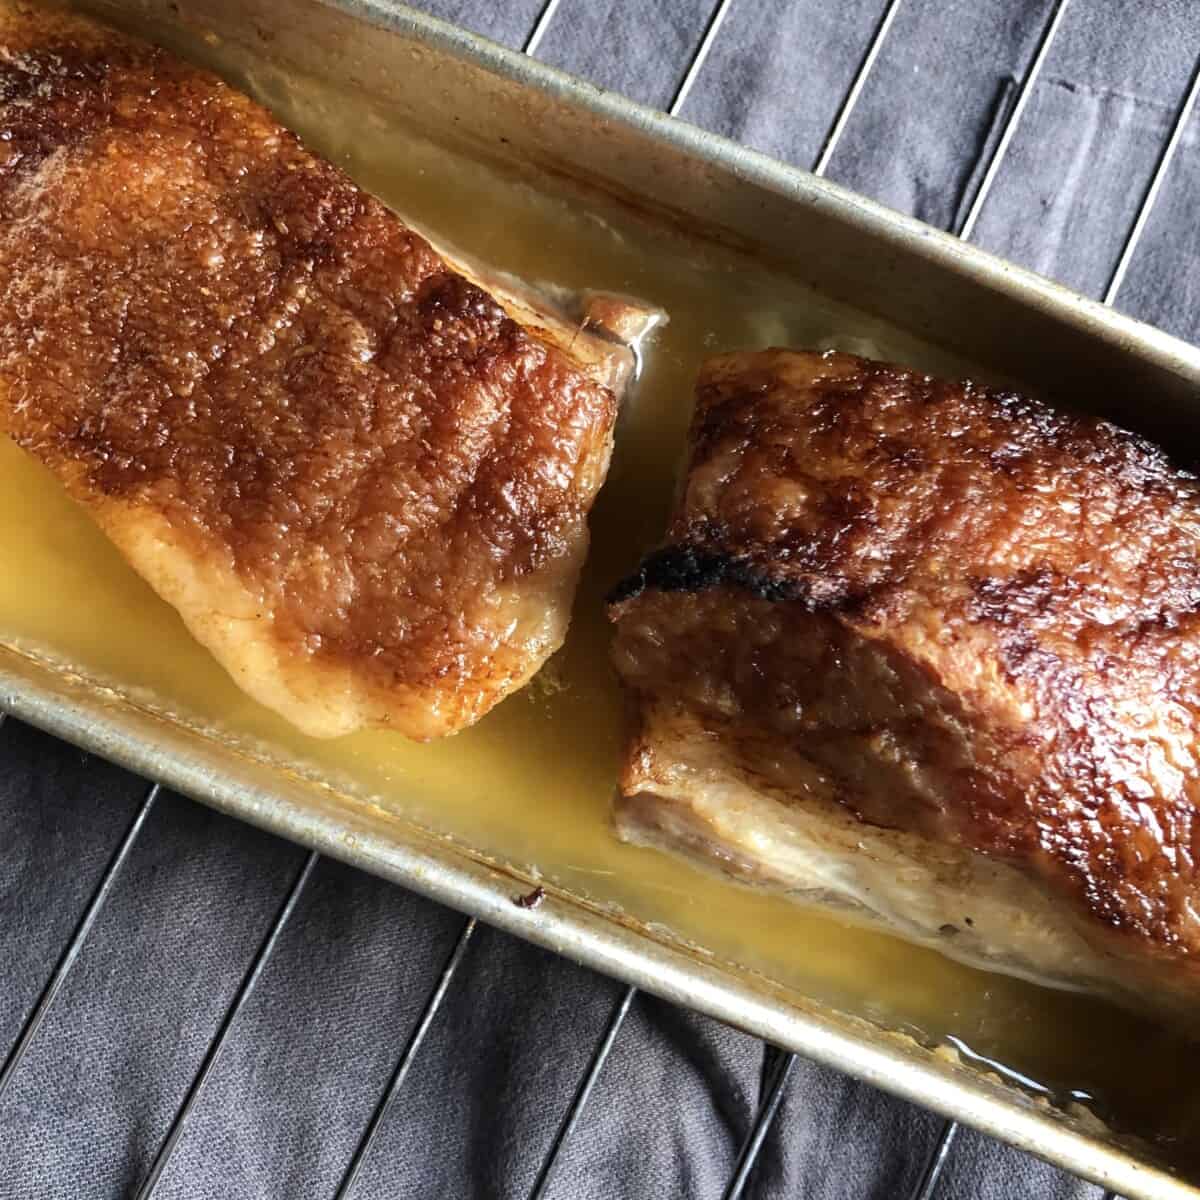 perfectly braised golden brown pork belly still in the pan just after being removed from the oven